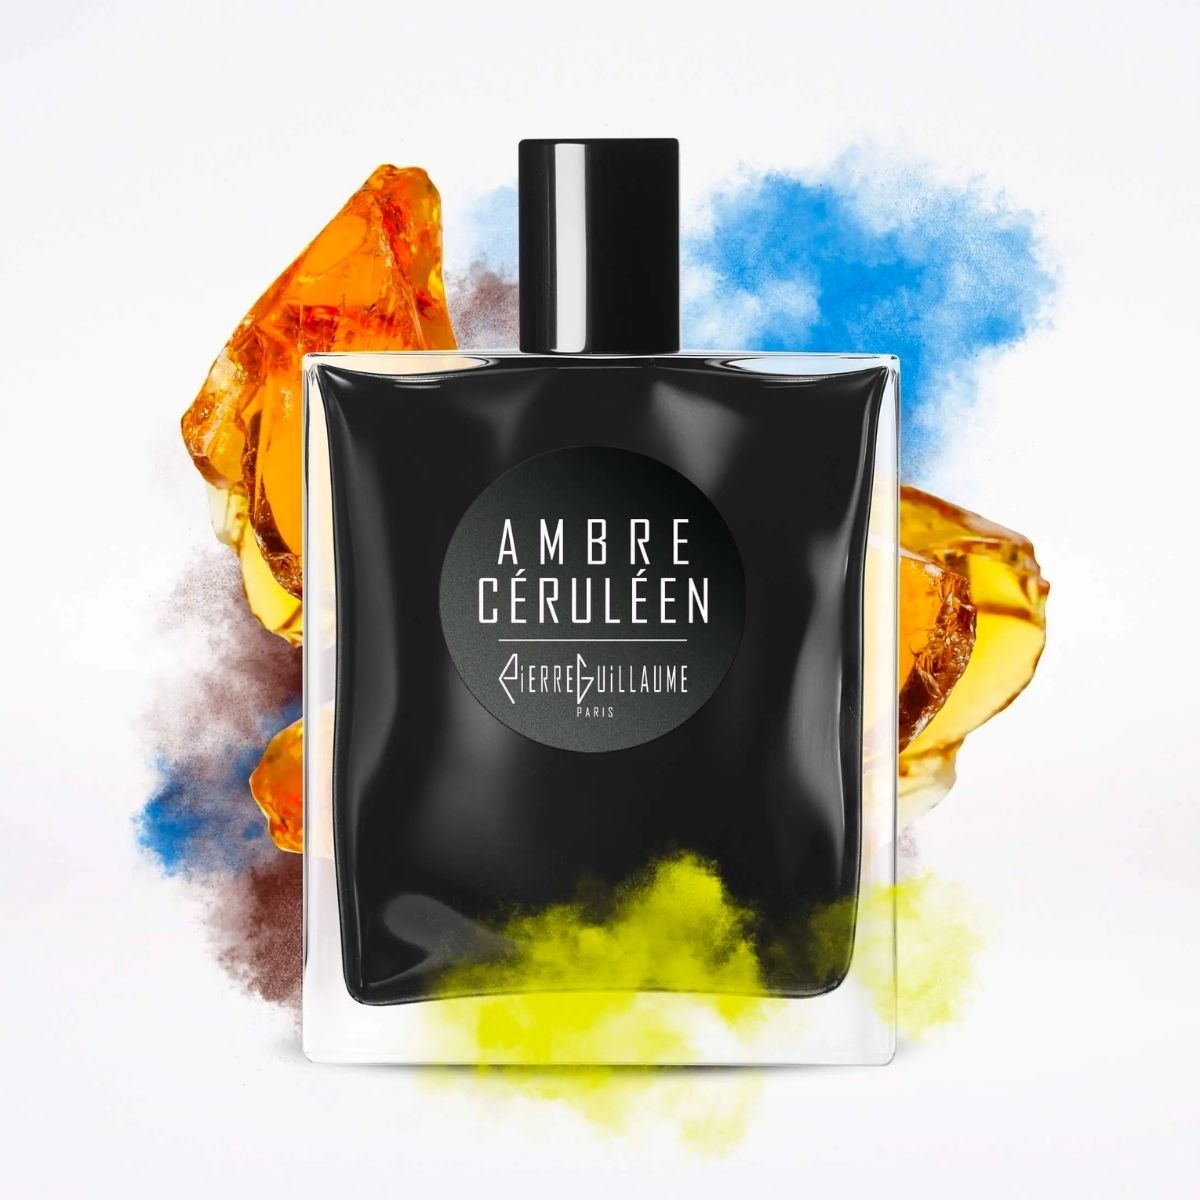 Image of Ambre Ceruleen 100 ml by Pierre Guillaume Noire